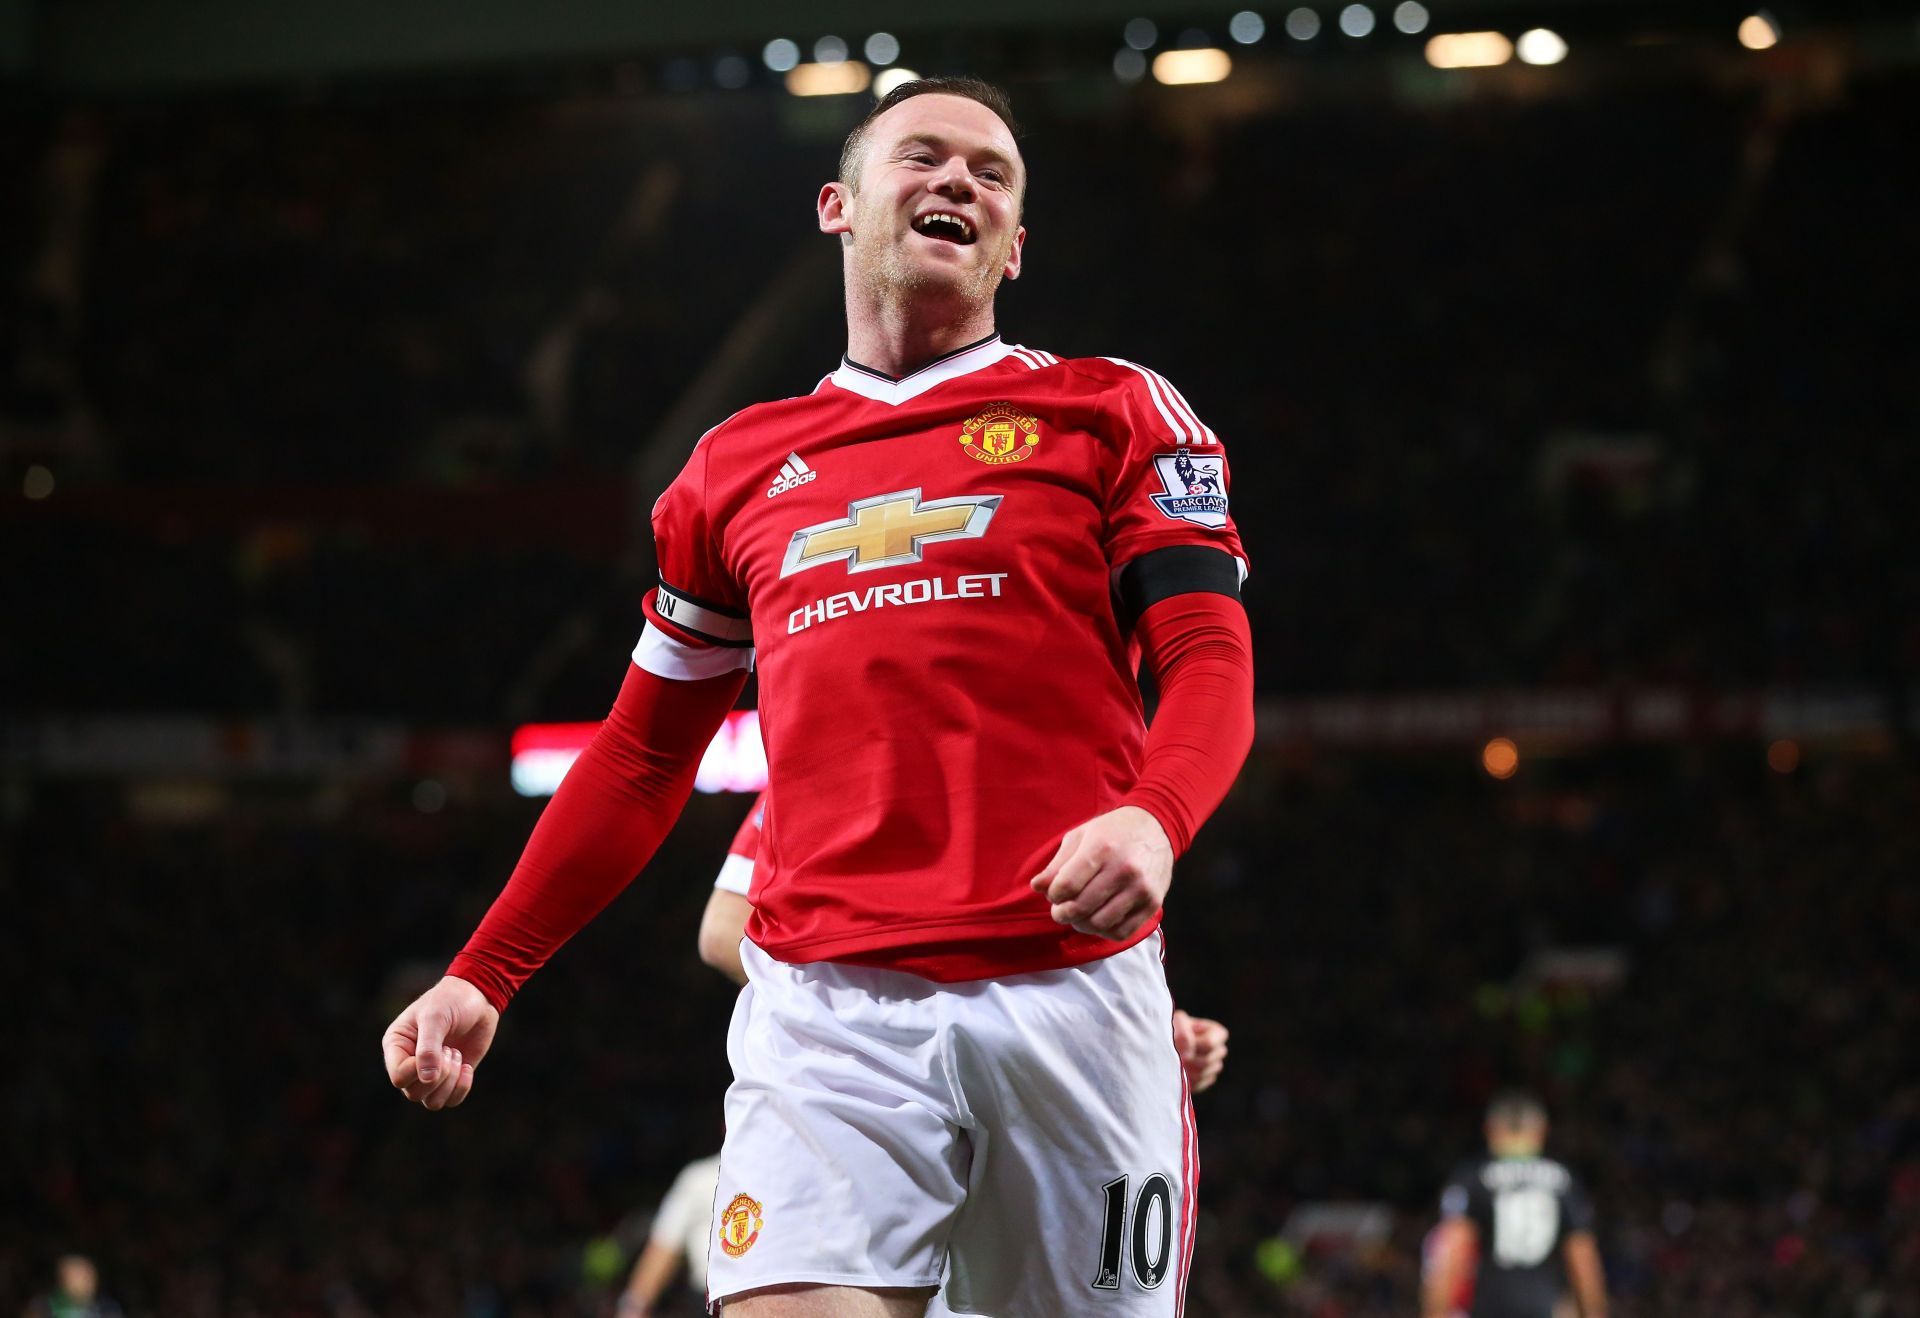 Rooney has been praised by many legends of the game.